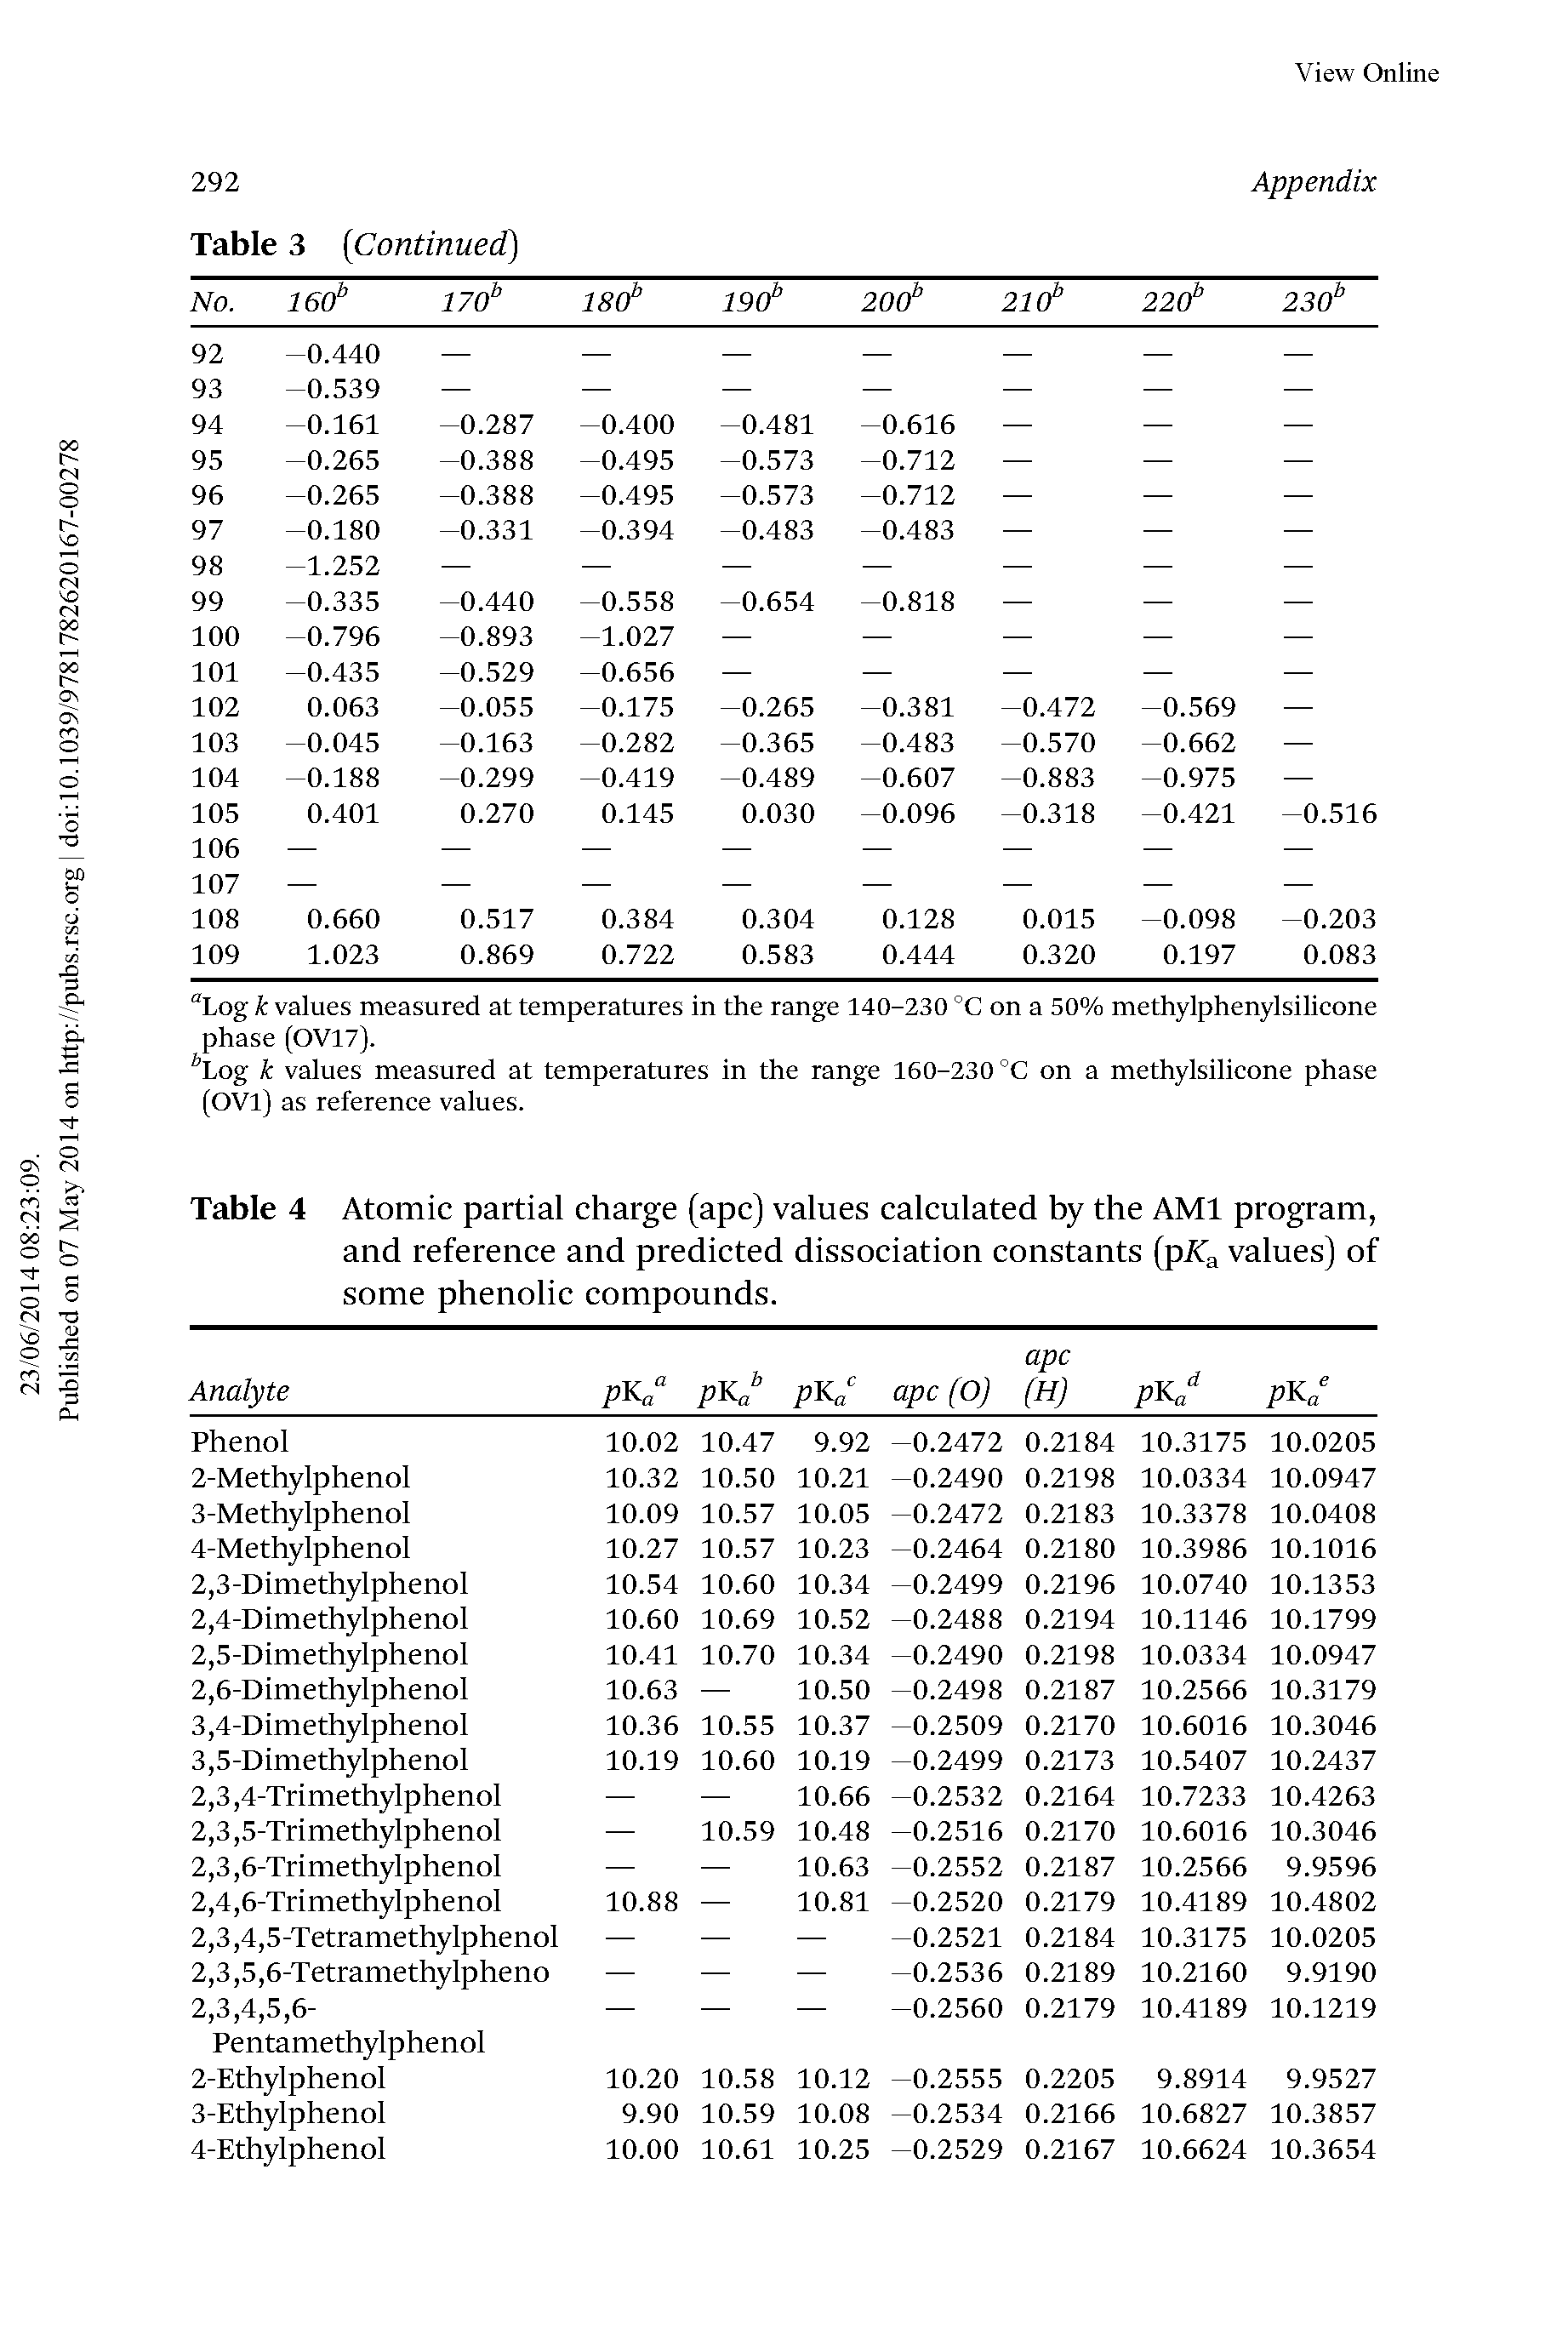 Table 4 Atomic partial charge (ape) values calculated by the AMI program, and reference and predicted dissociation constants pK values) of some phenolic compounds.